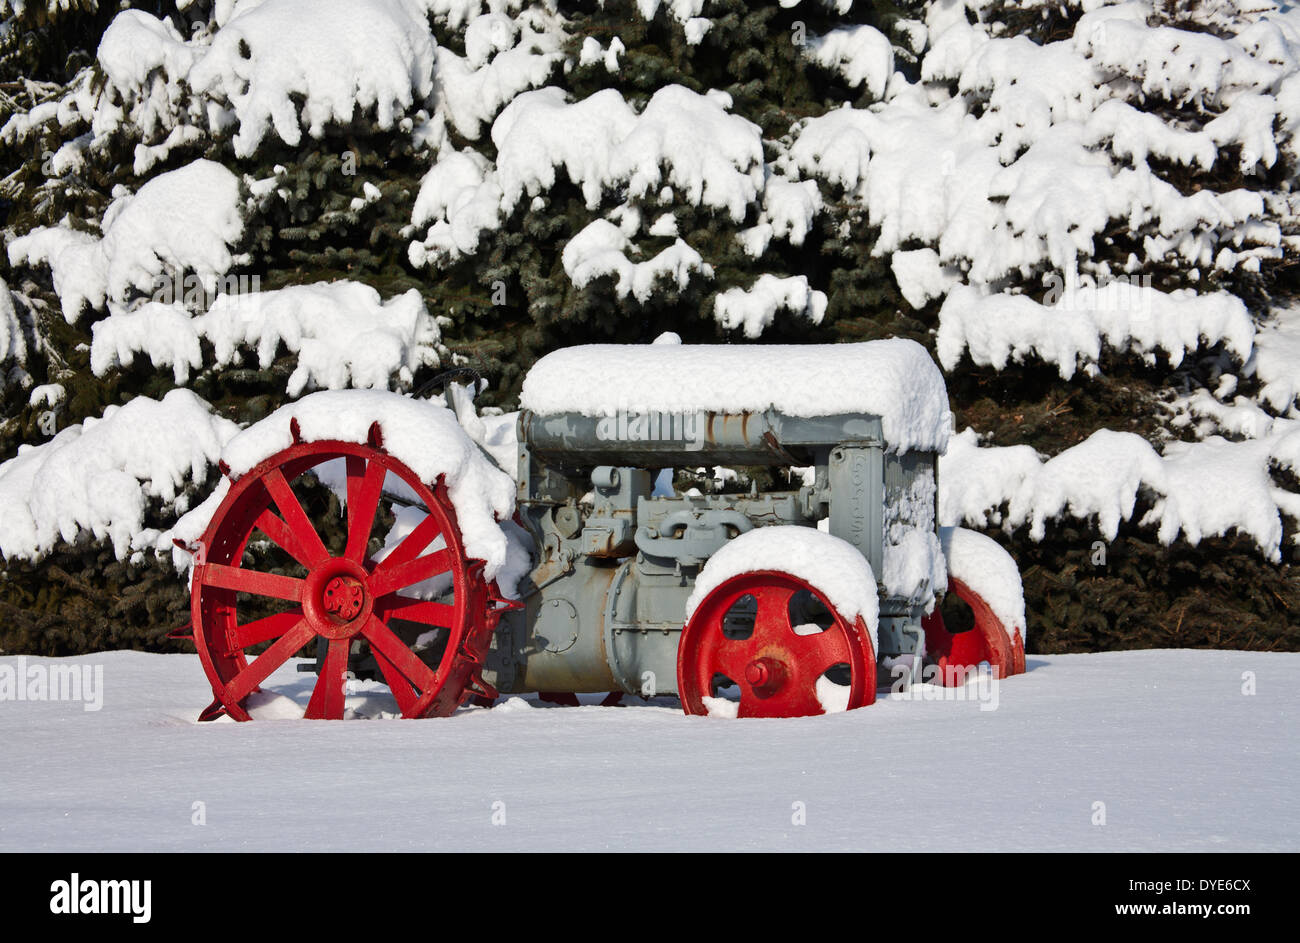 Retro winter images, vintage Fordson antique tractor close up with red wheels snow covered in New Jersey, USA, Christmas scene, File sz. 7.41 MB, Stock Photo